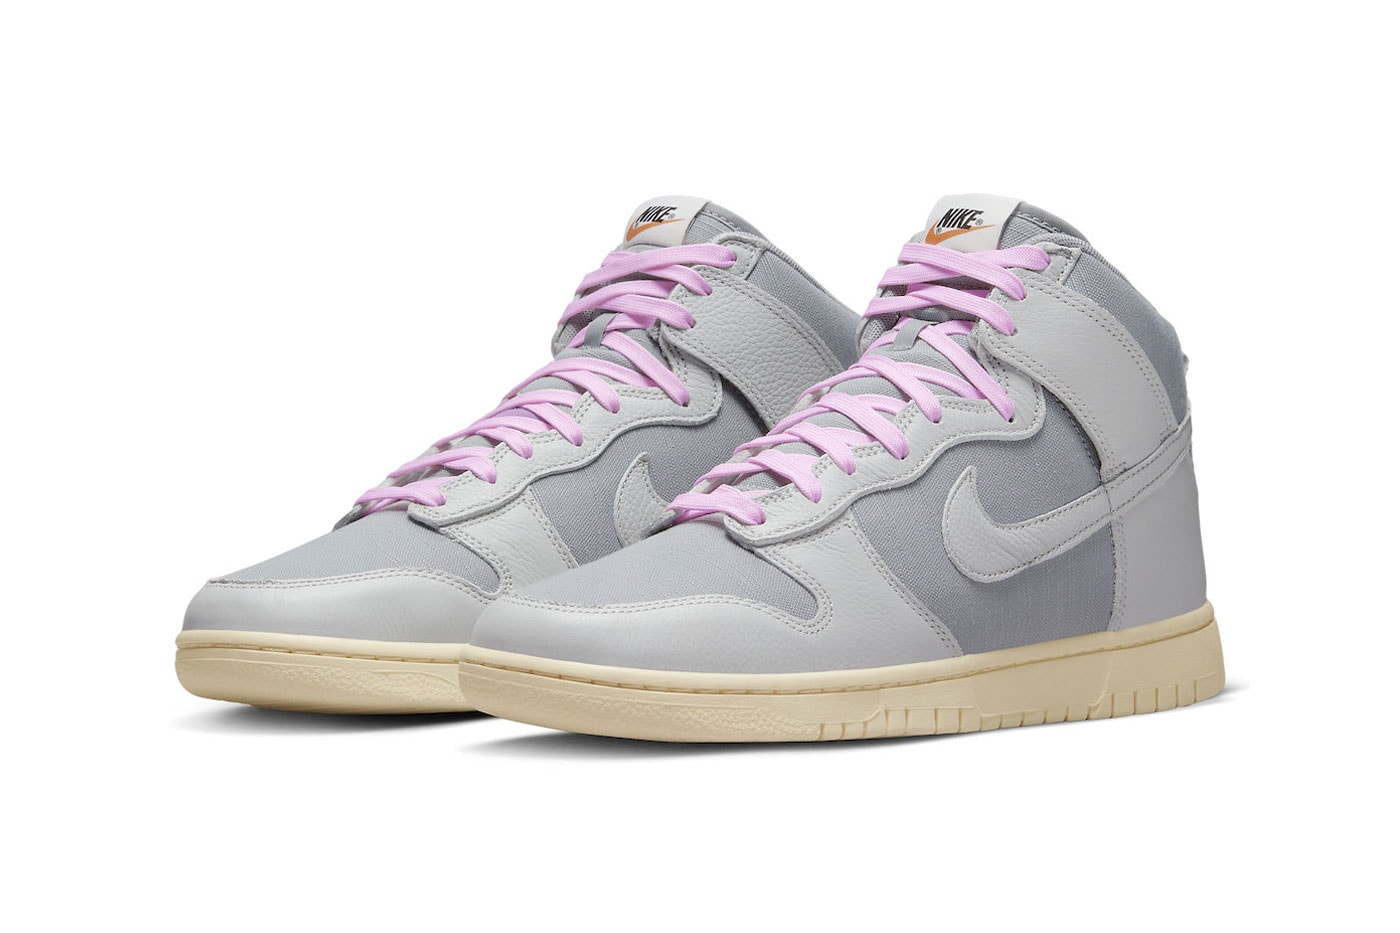 Nike Dunk High "Certified Fresh" Surfaces in a New Grey Fog Colorway DQ8800-001